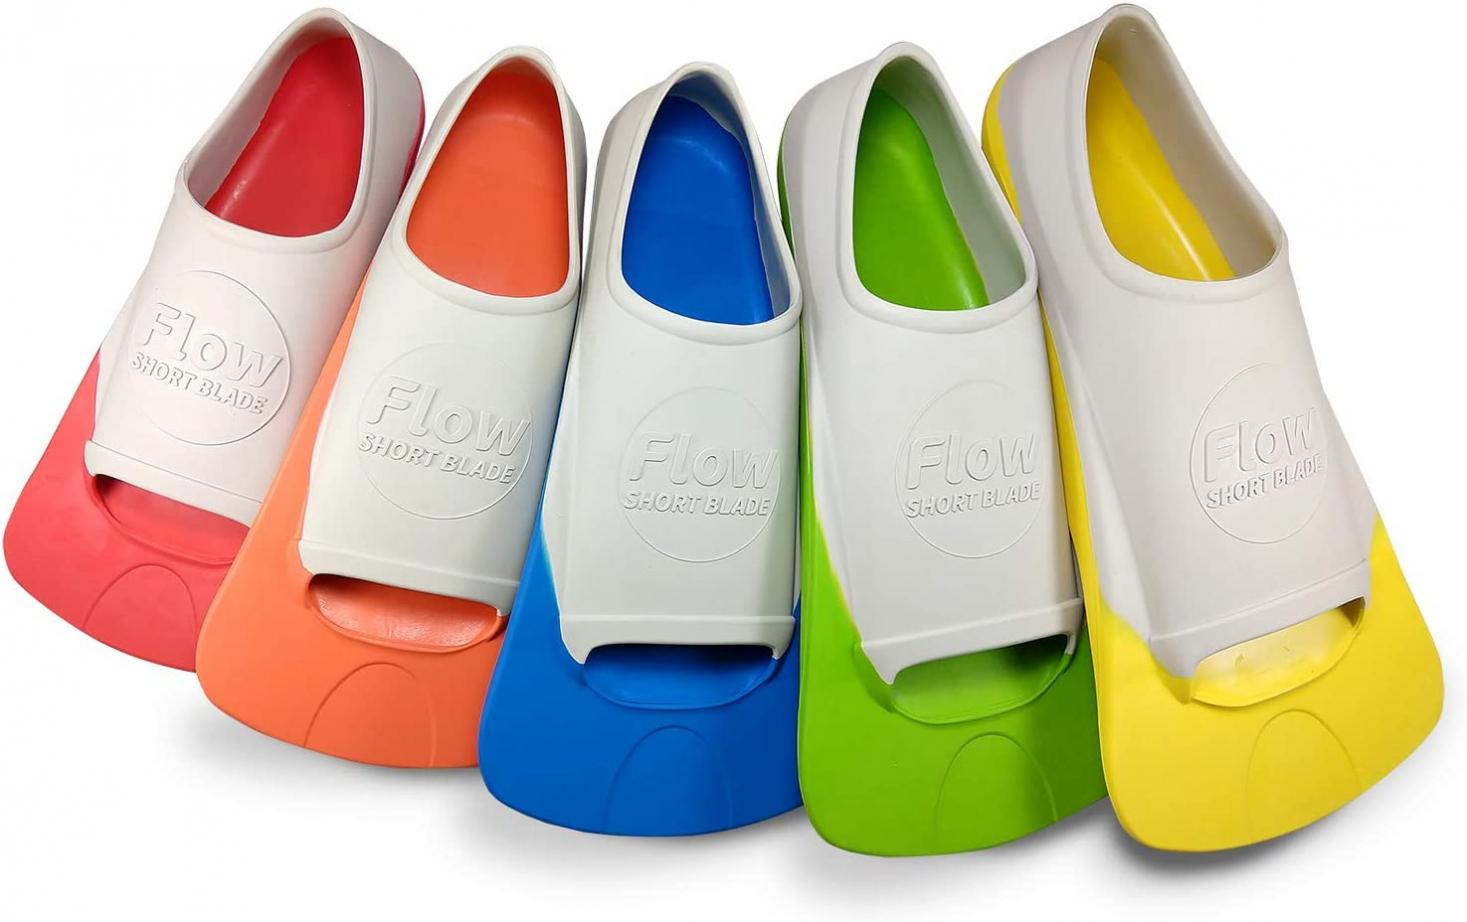 Flow Premium Short Blade Floating Fins for Swim and Lap Training - Youth Sizes for Kids, Young Men, and Women